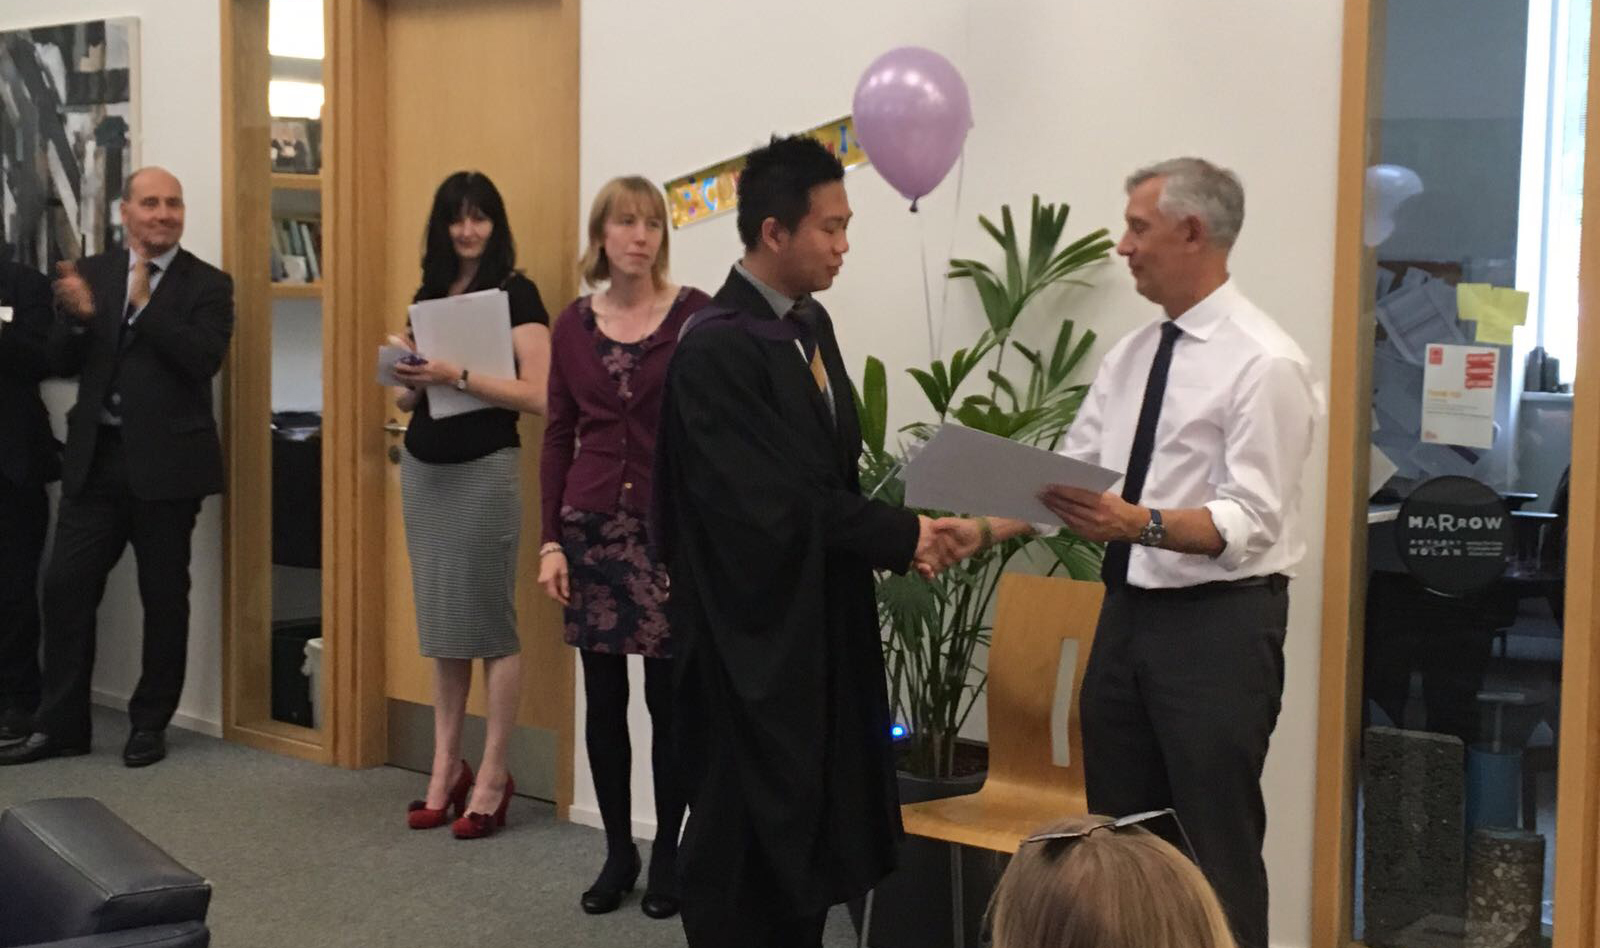 Jacky receiving his award for outstanding performance in his studies